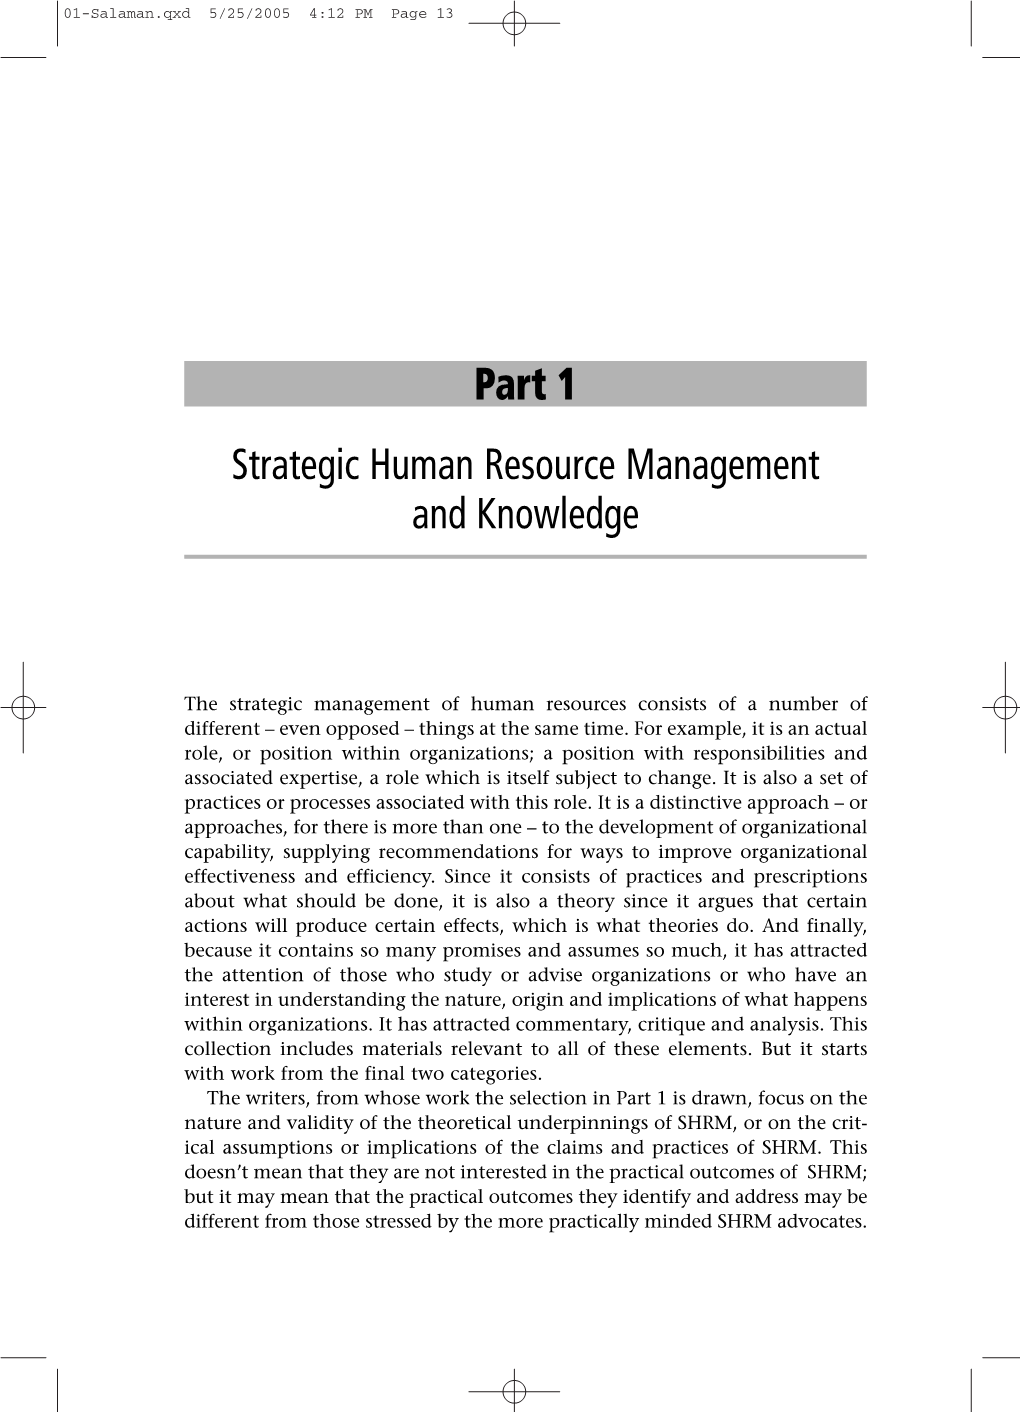 Part 1 Strategic Human Resource Management and Knowledge